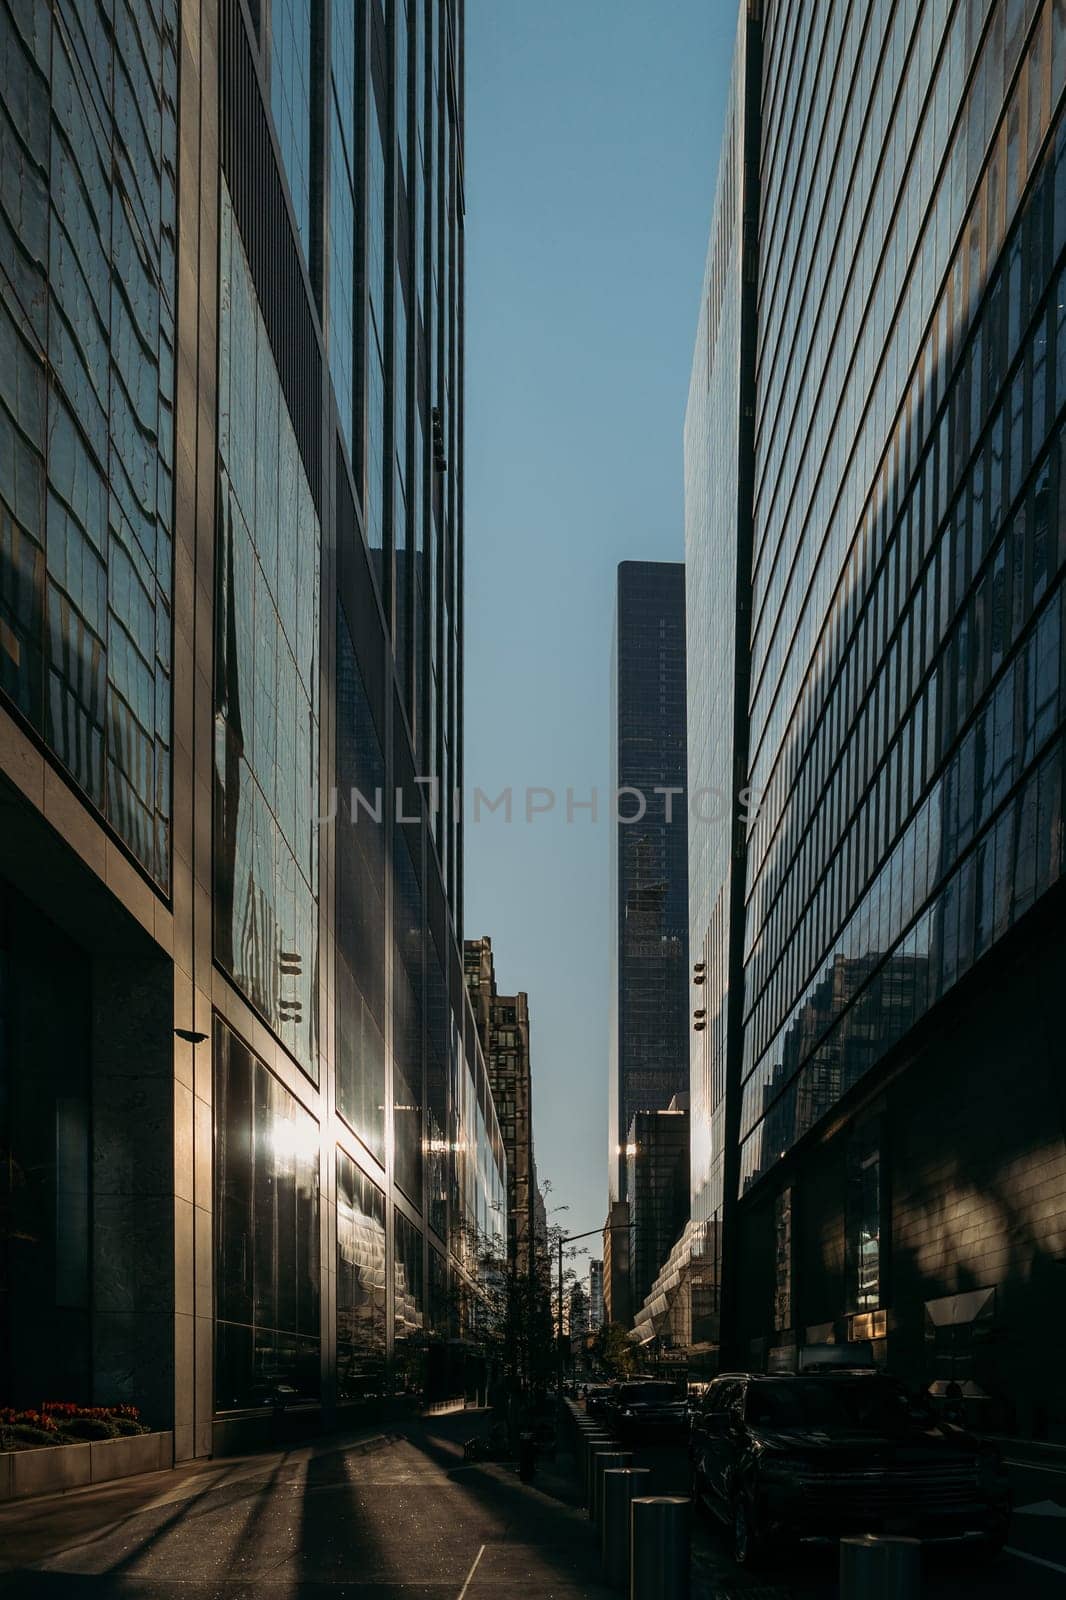 The sun casts long shadows between high-rise buildings in an NYC alley.